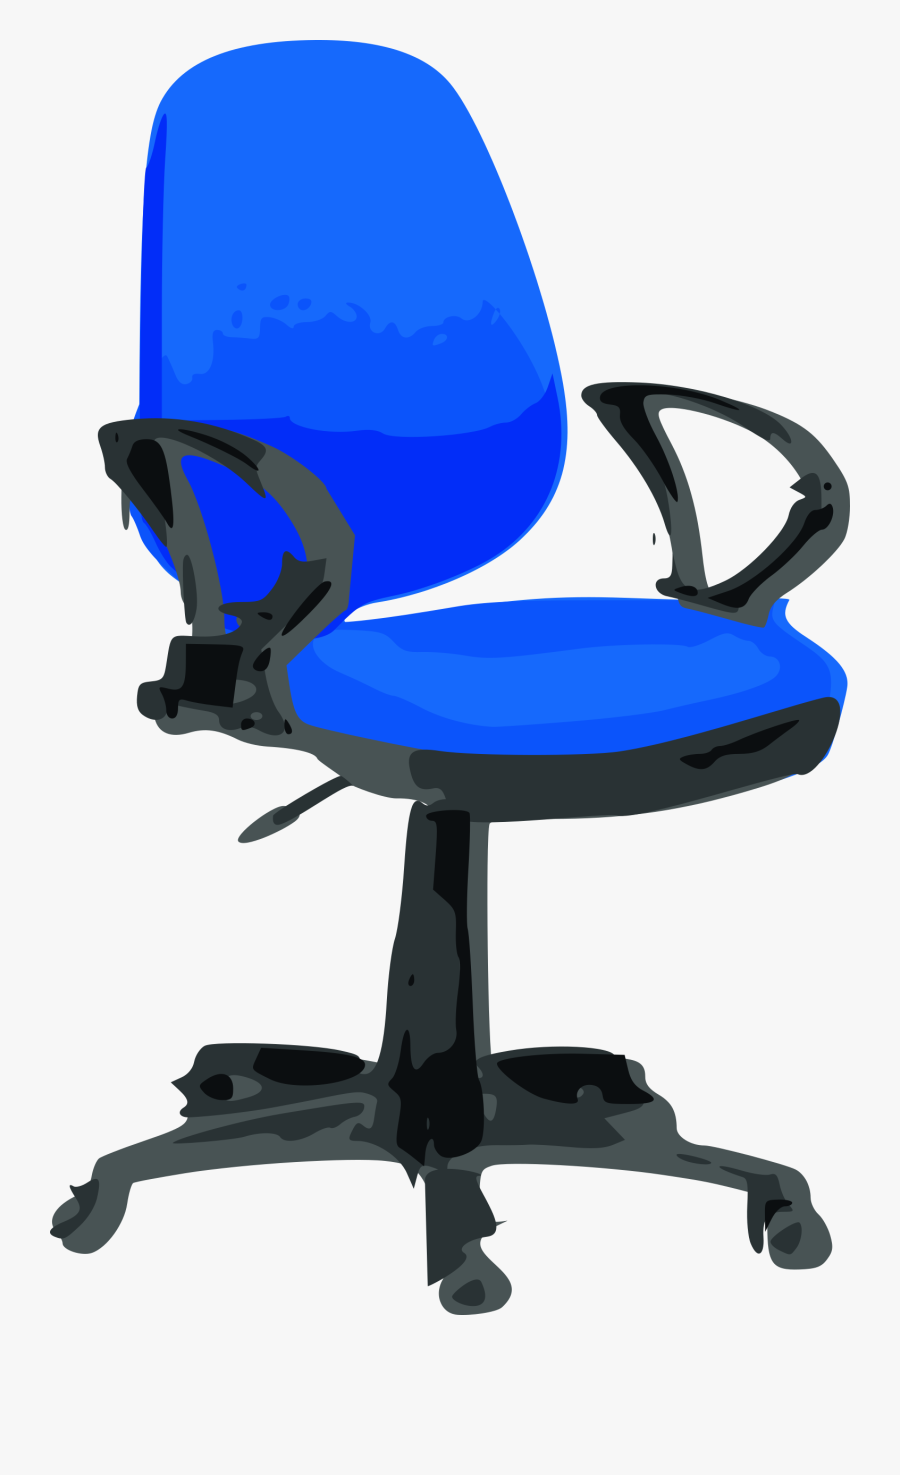 Desk Chair-blue With Wheels - Office Chair Clipart, Transparent Clipart